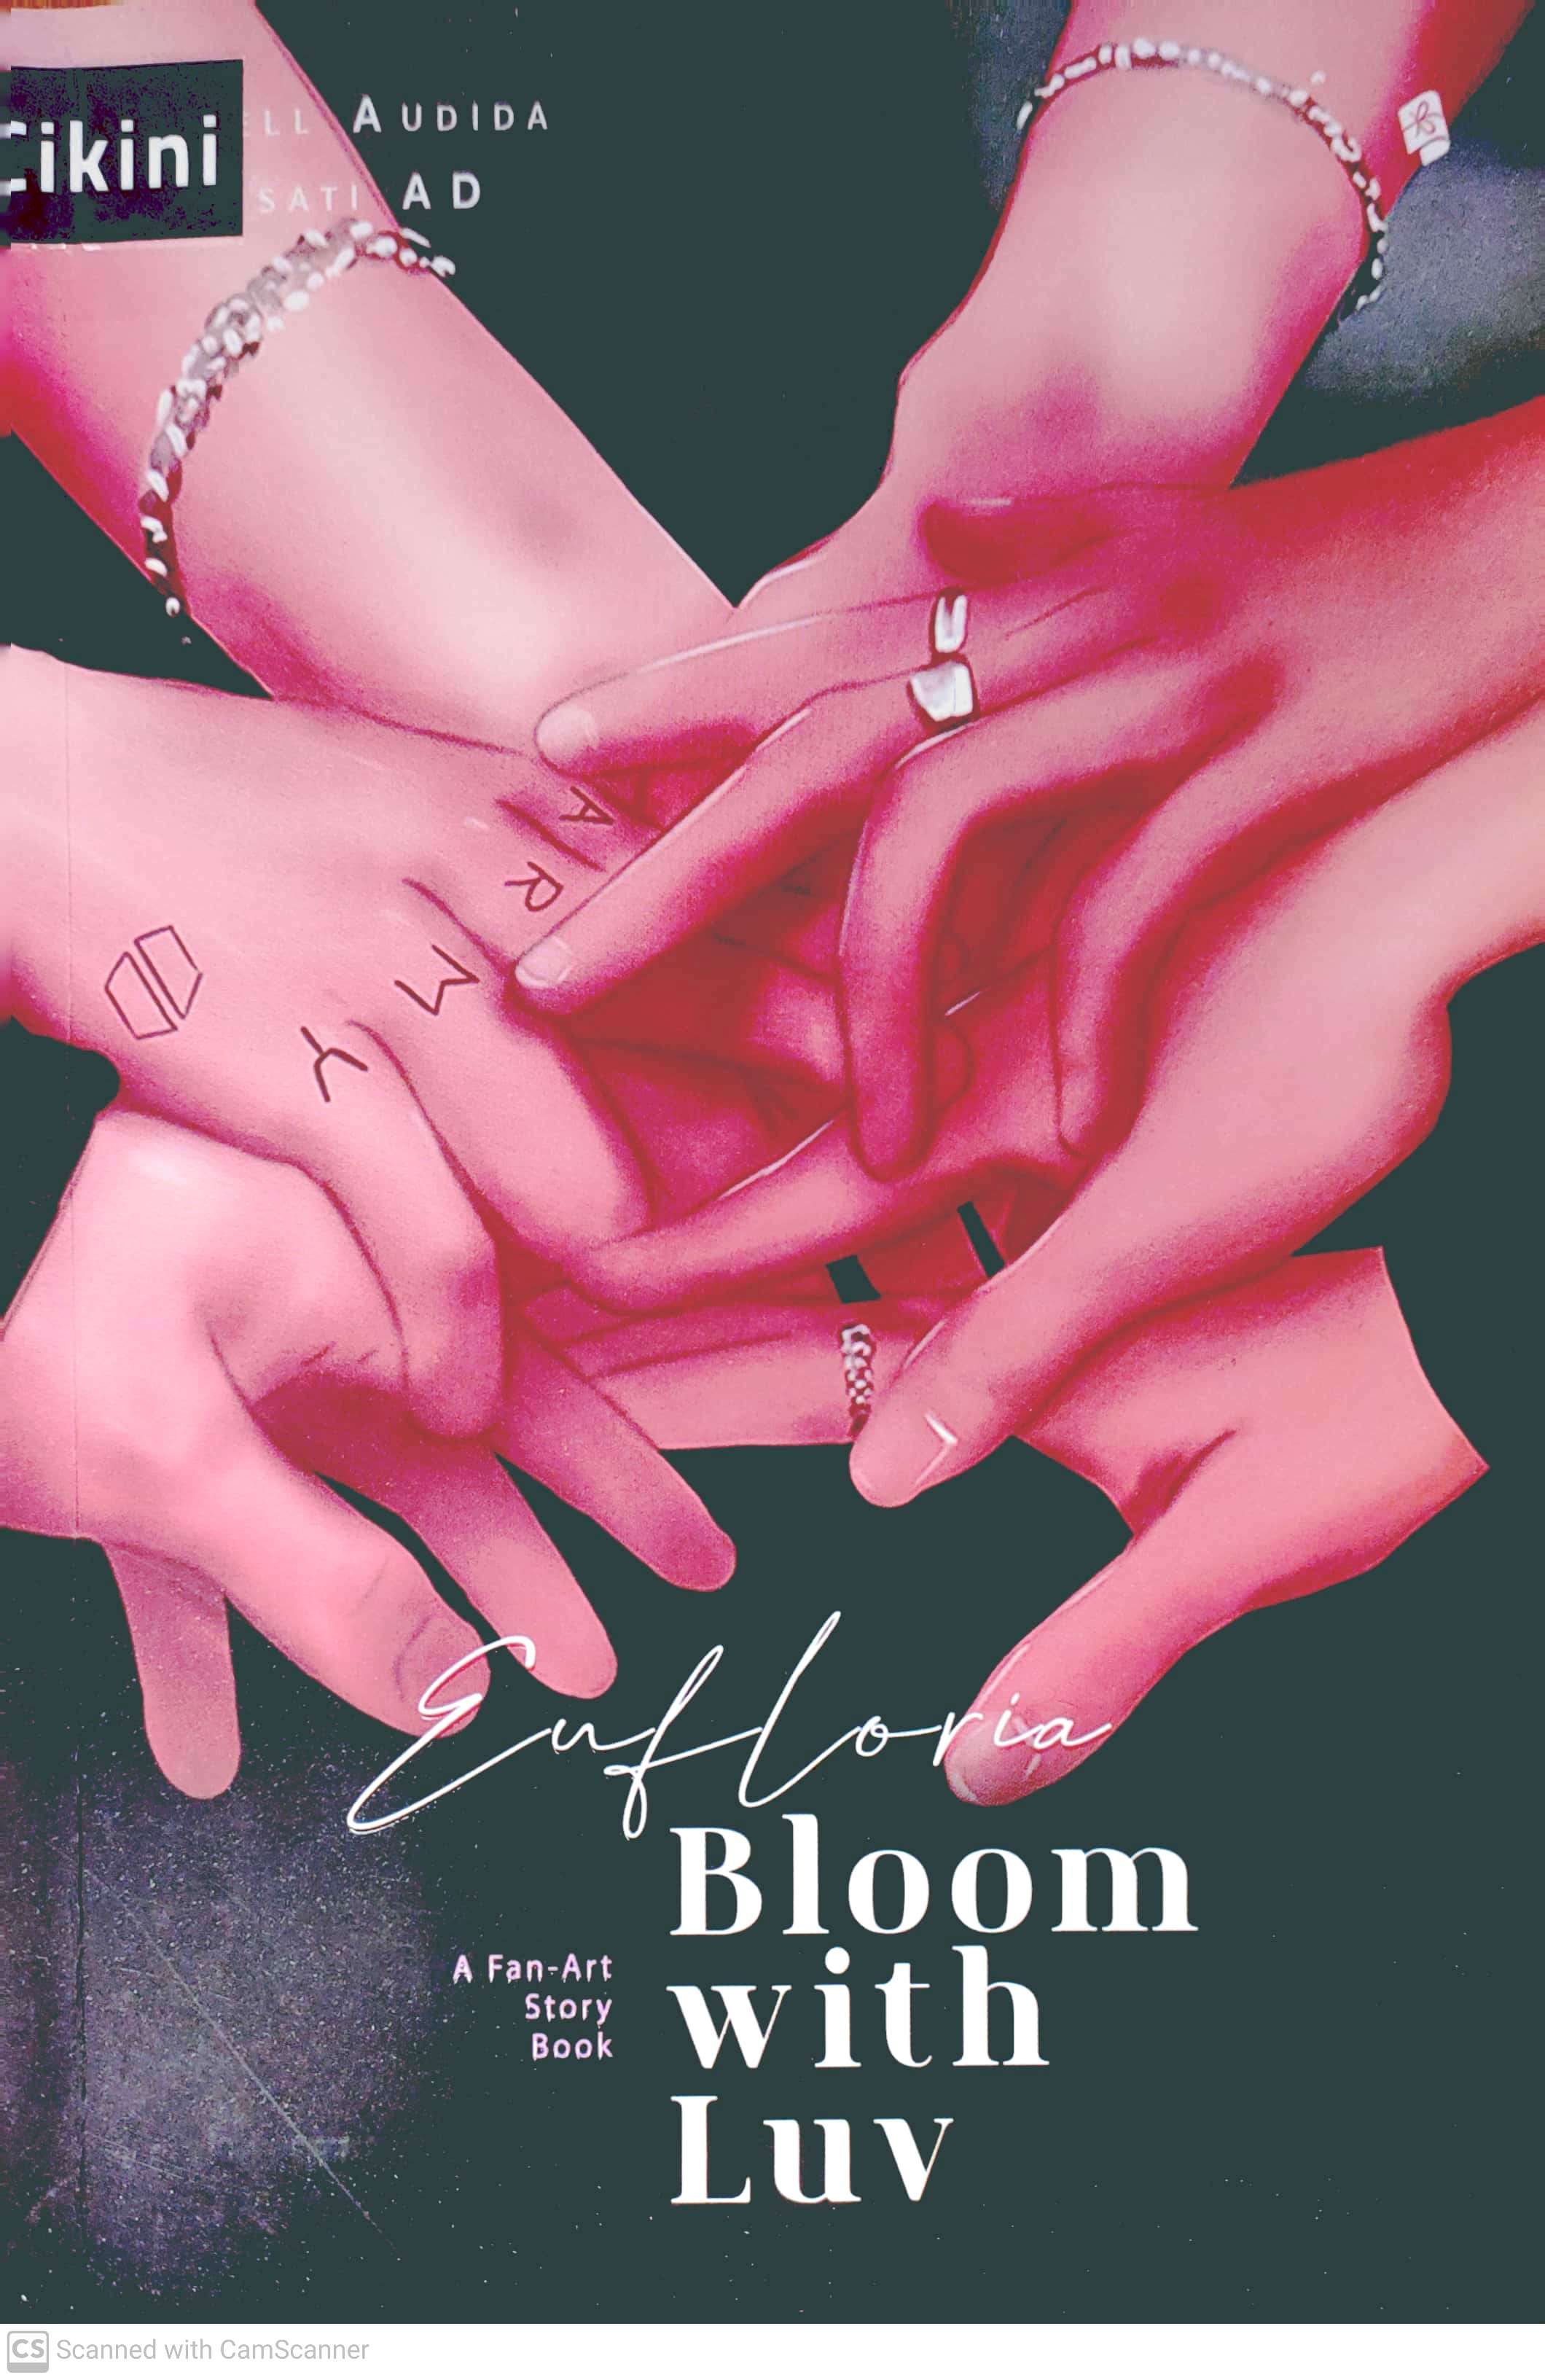 Enfloria bloom with luv a fan-art story book